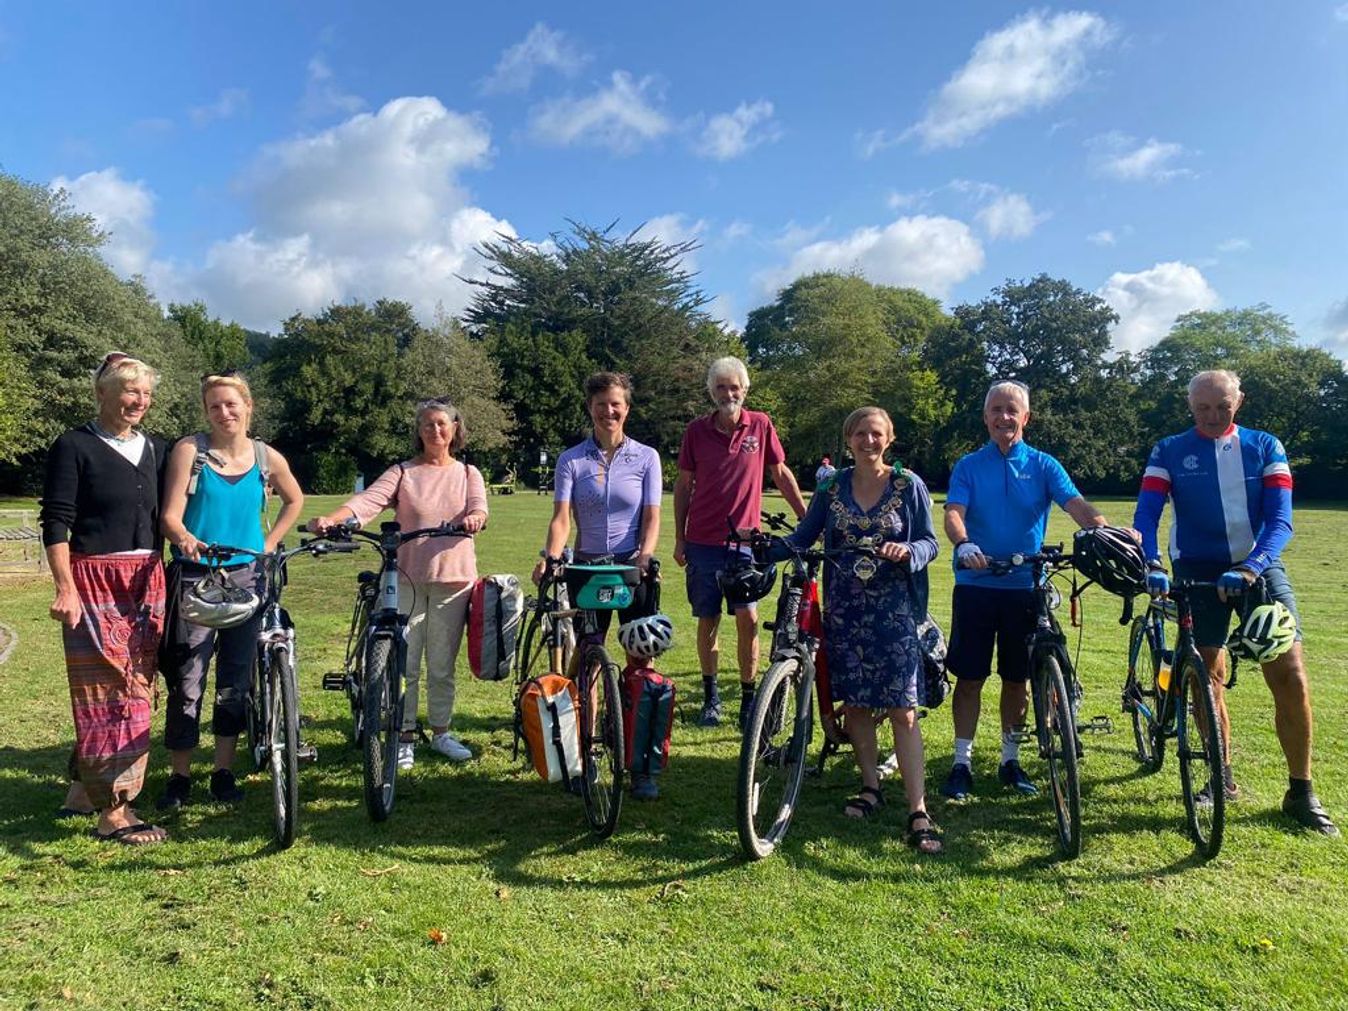 People from across the UK joined Strong as she rode